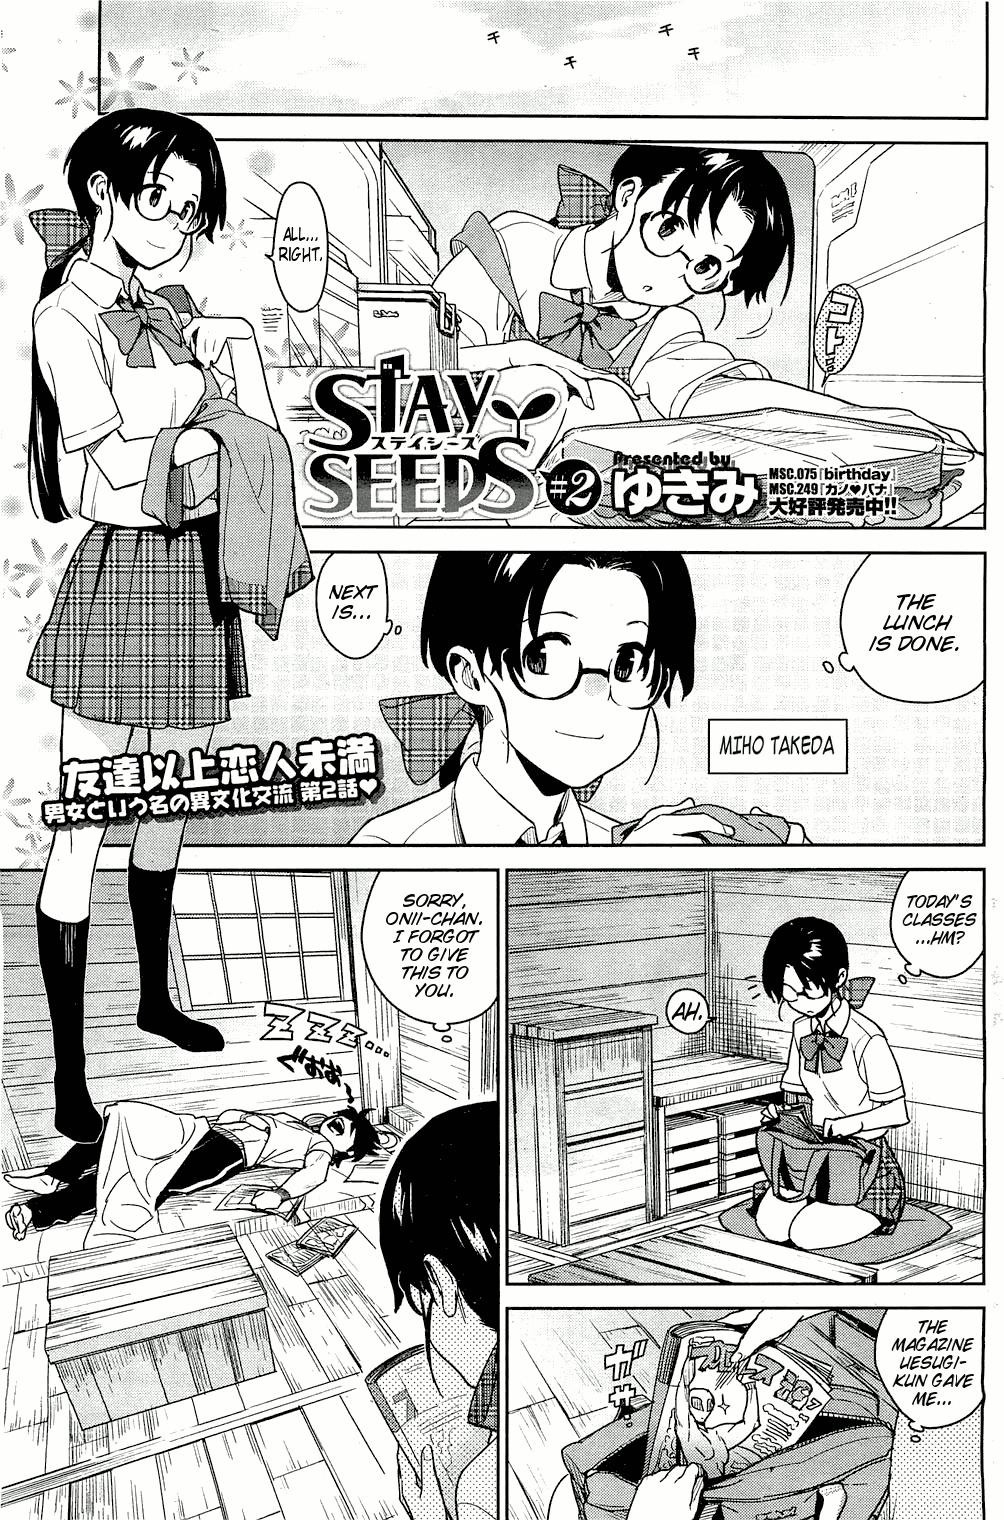 Stay Seeds Ch. 1-2 18